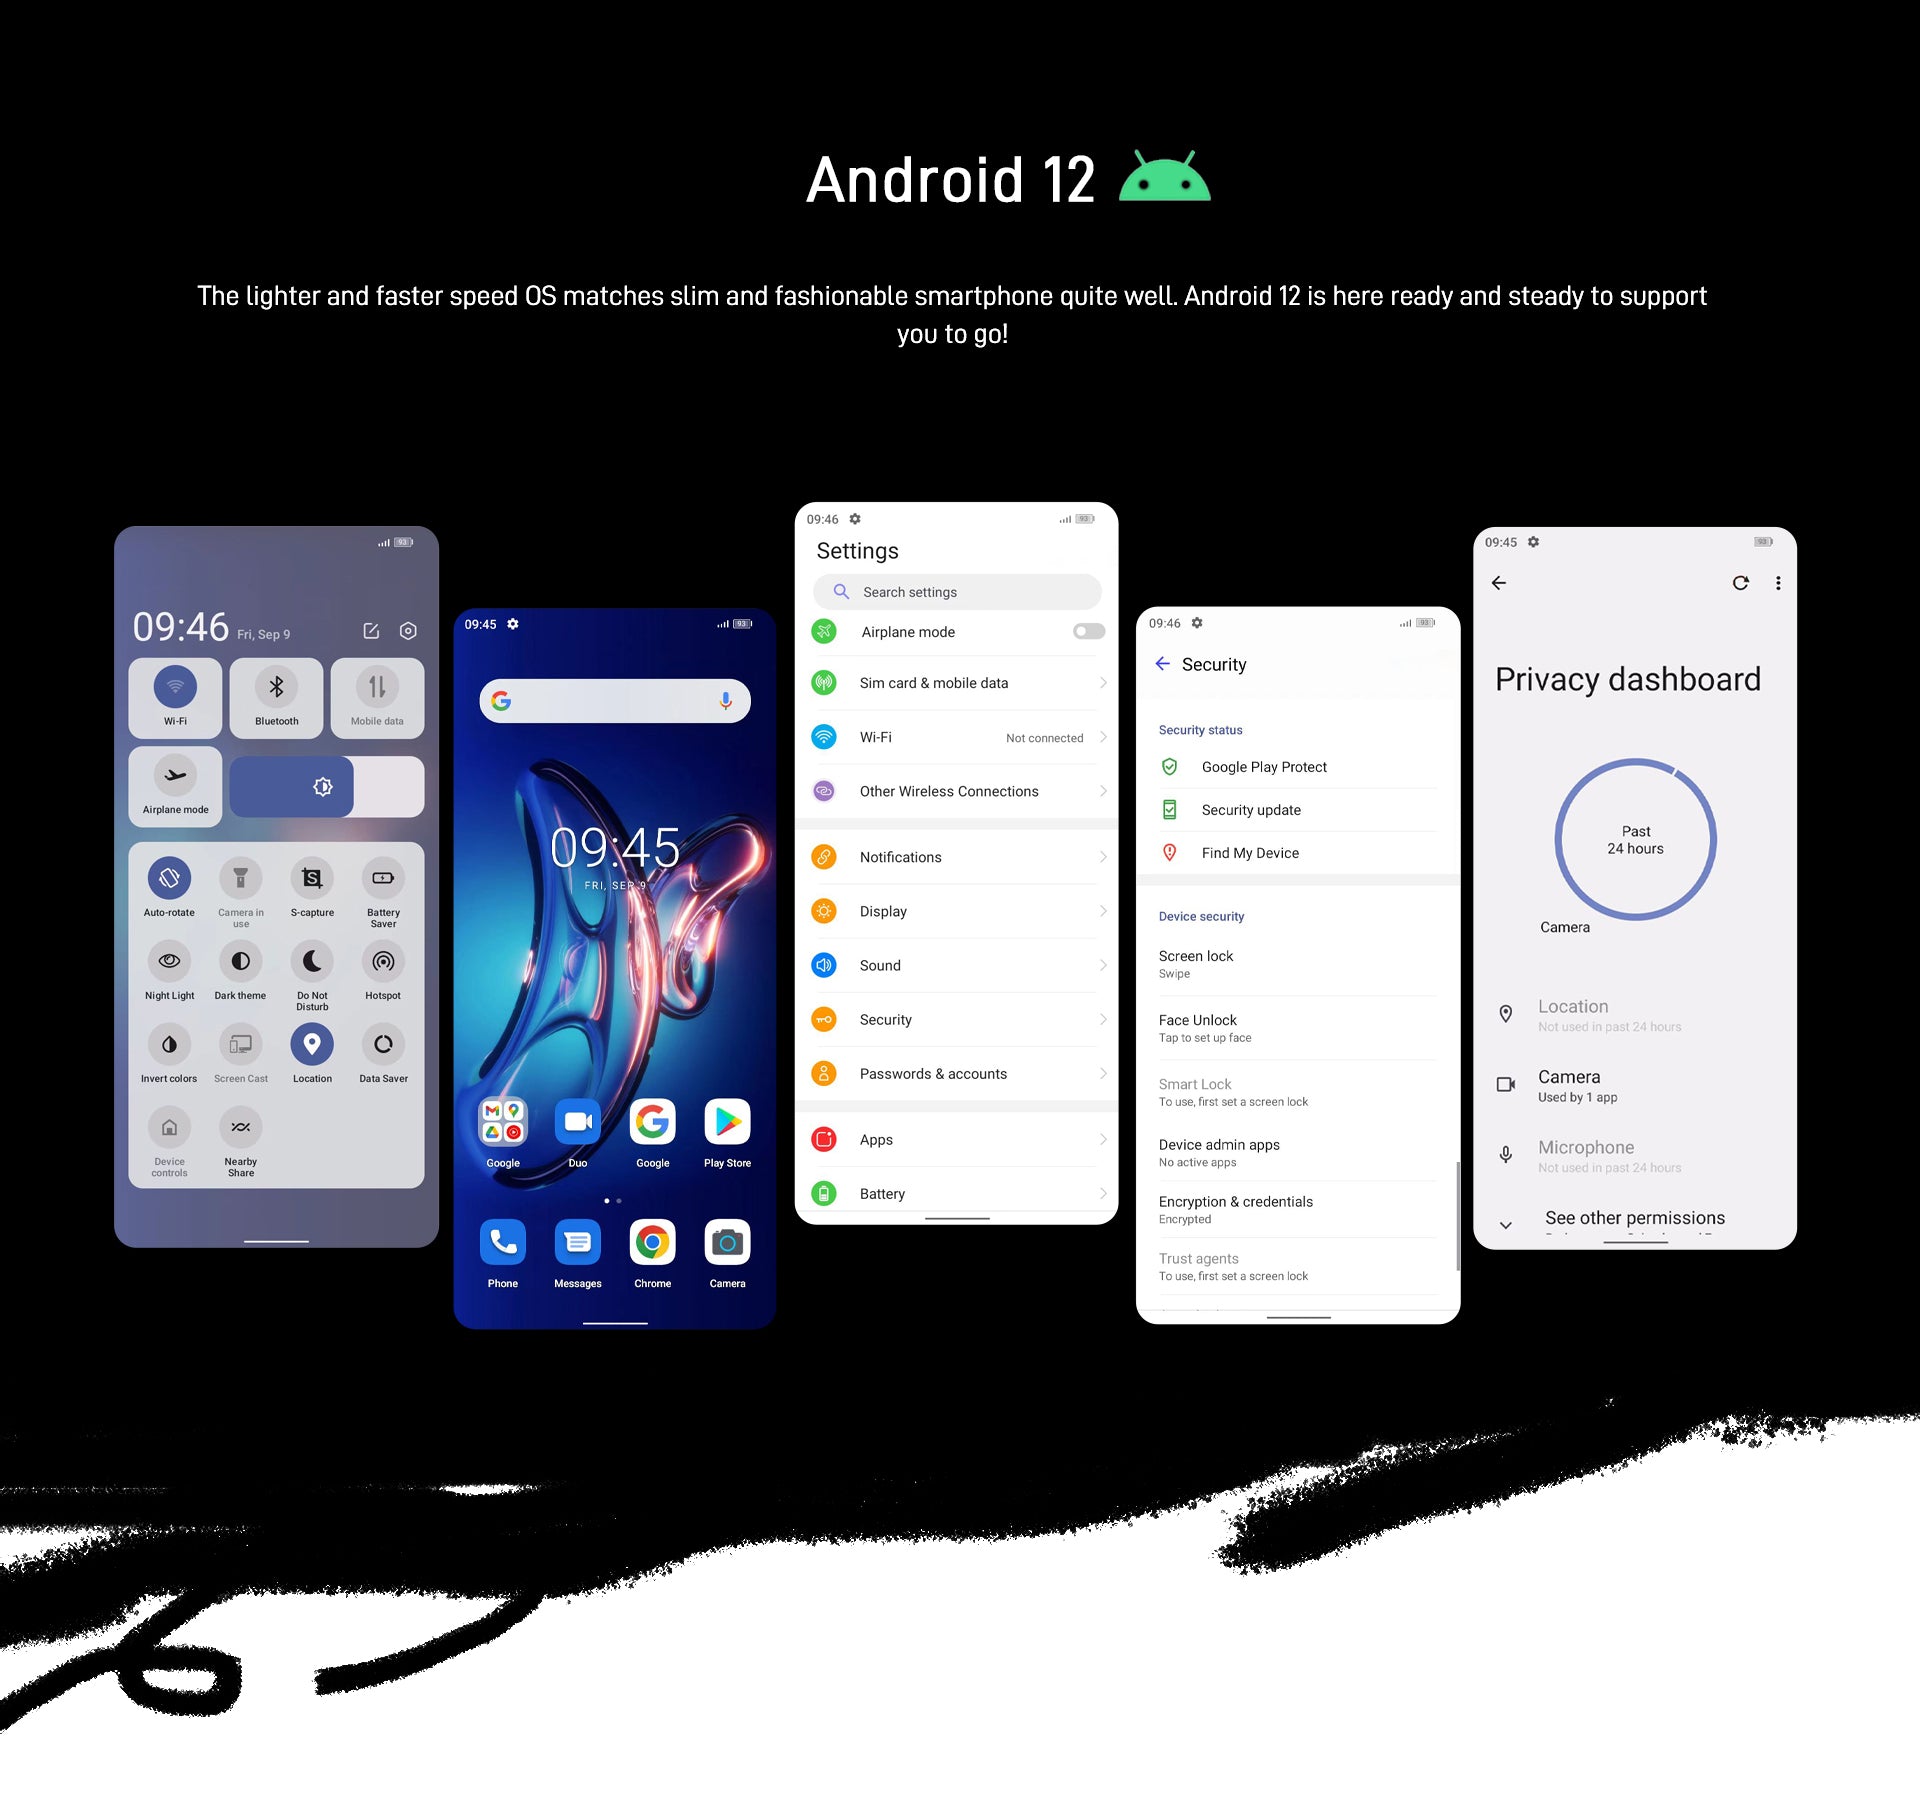 Android 12 The lighter and faster speed OS matches slim and fashionable smartphone quite well. Android 12 is here ready and steady to support you to go!